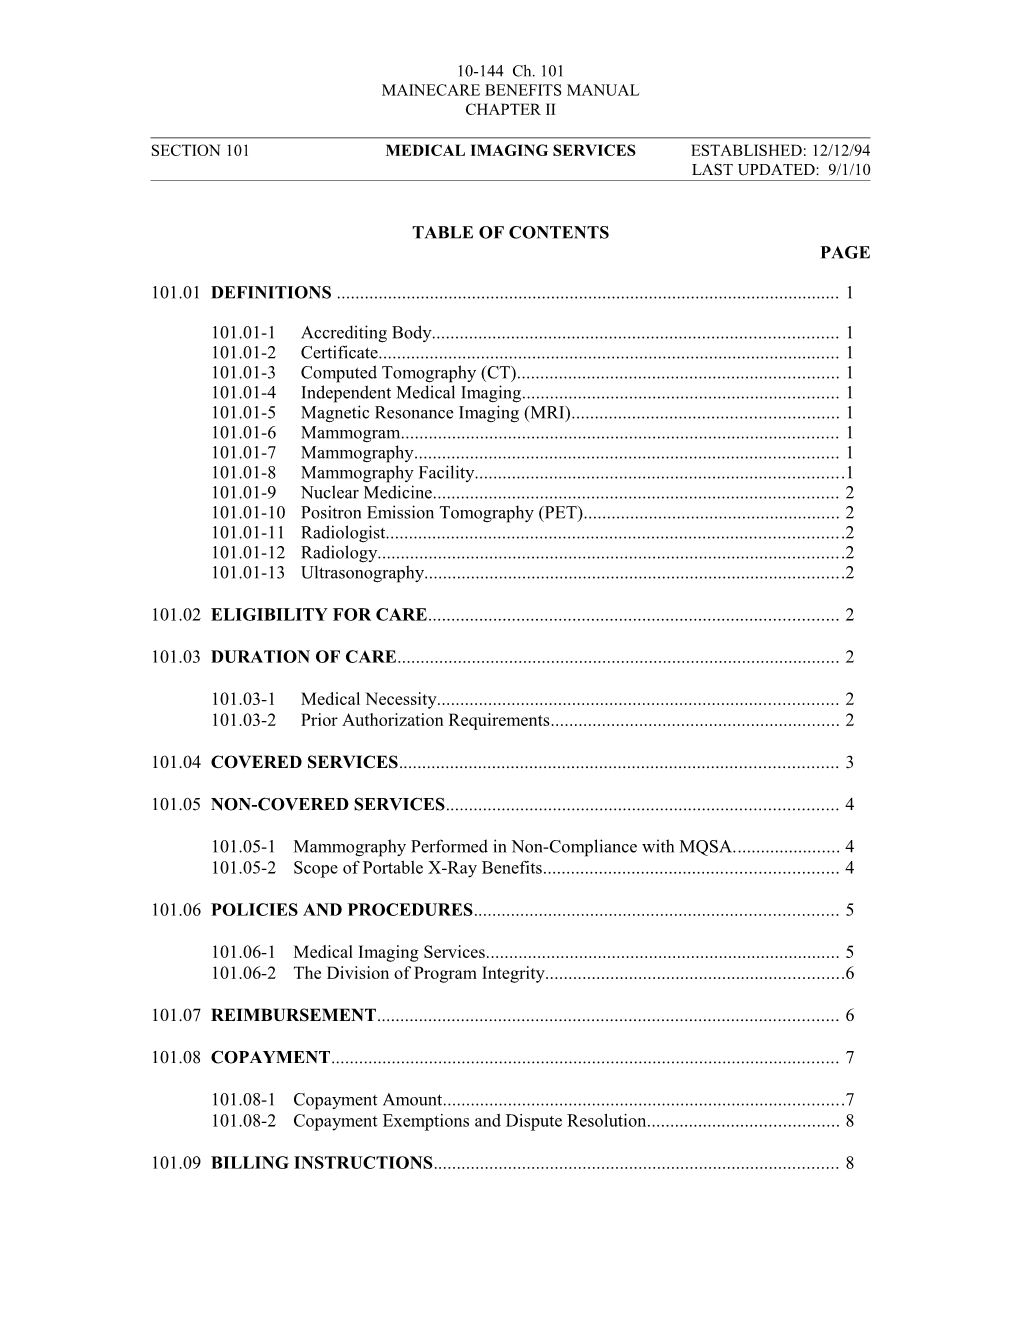 Table of Contents s524